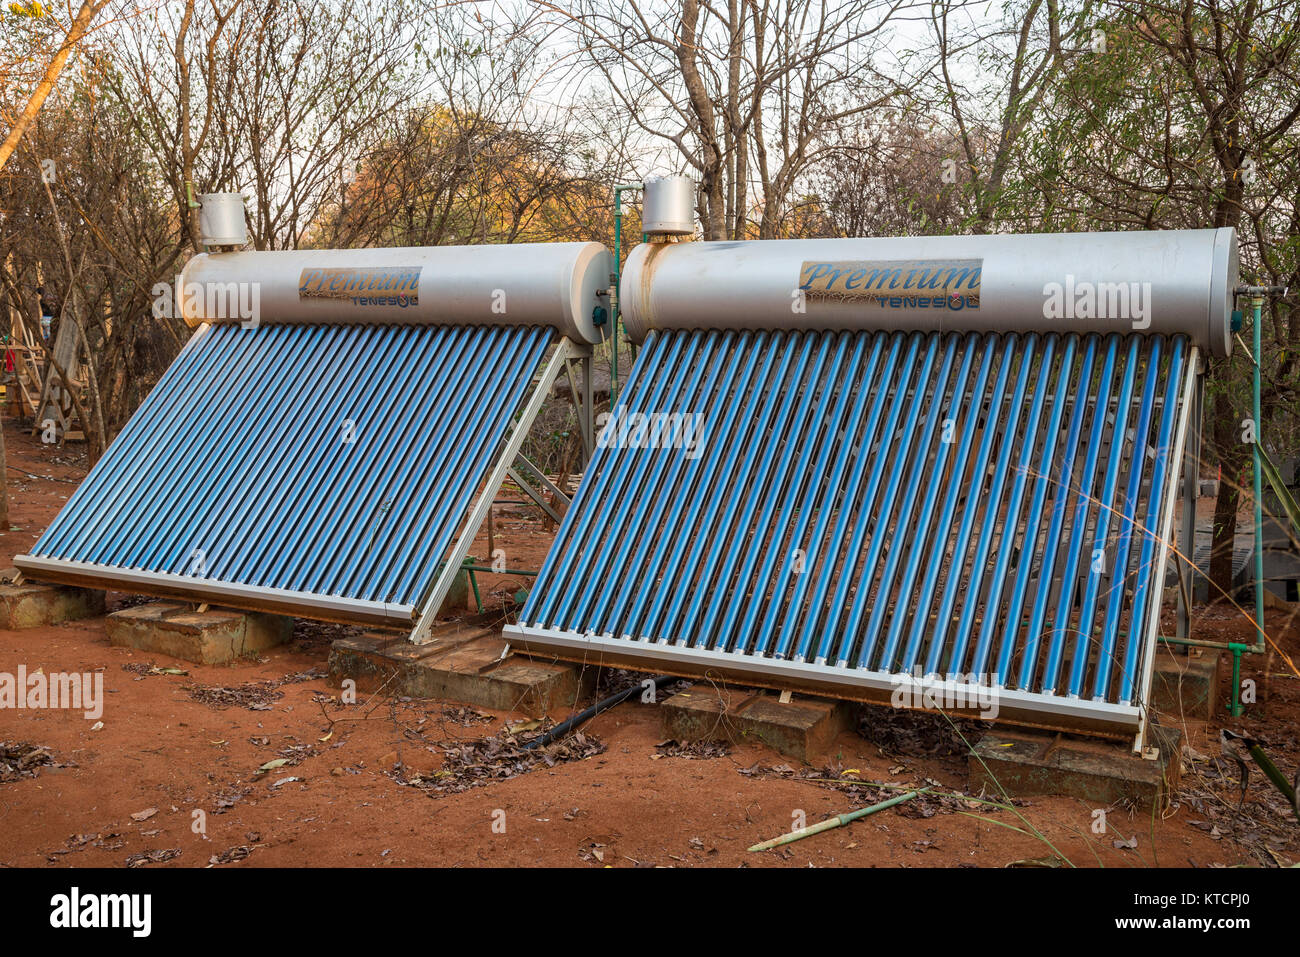 Solar powered water heater provides hot water to guest rooms at an eco-lodge Olympe du Bemaraha near Tsingy National Park. Madagascar, Africa. Stock Photo